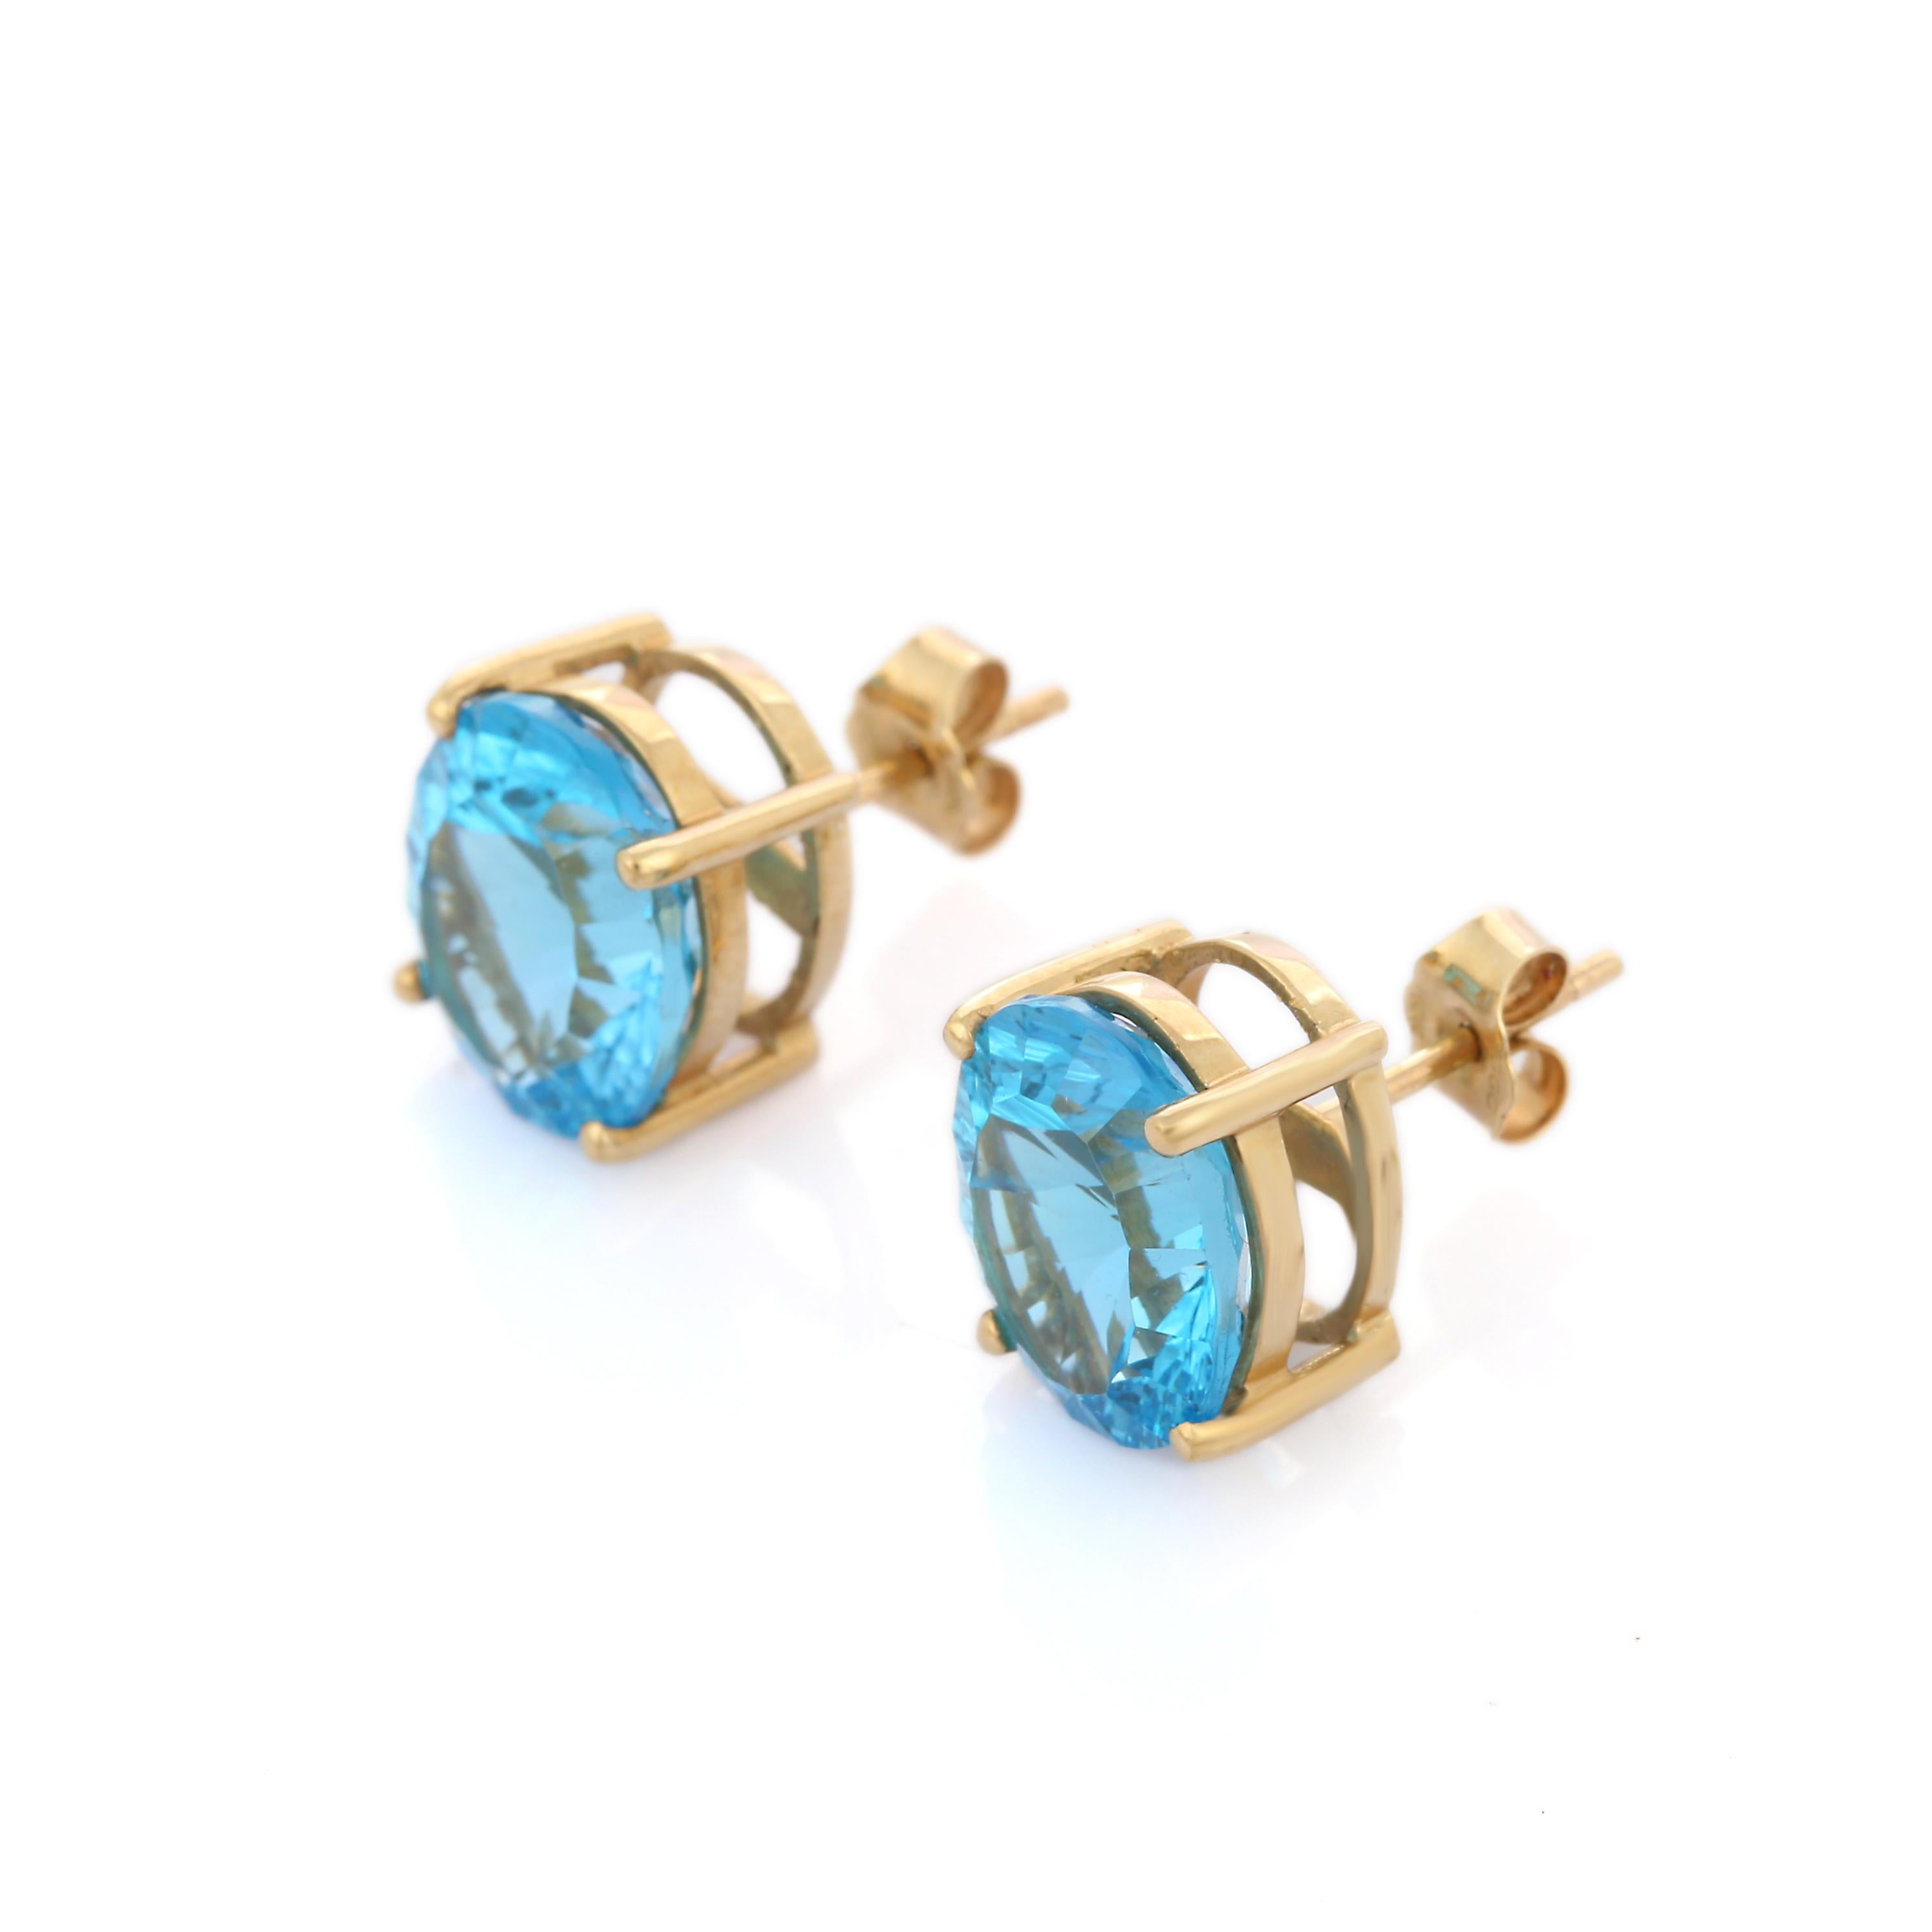 Earrings create a subtle beauty while showcasing the colors of the natural precious gemstones and illuminating diamonds making a statement.

Oval cut Blue Topaz Stud earrings in 10K gold. Embrace your look with these stunning pair of earrings